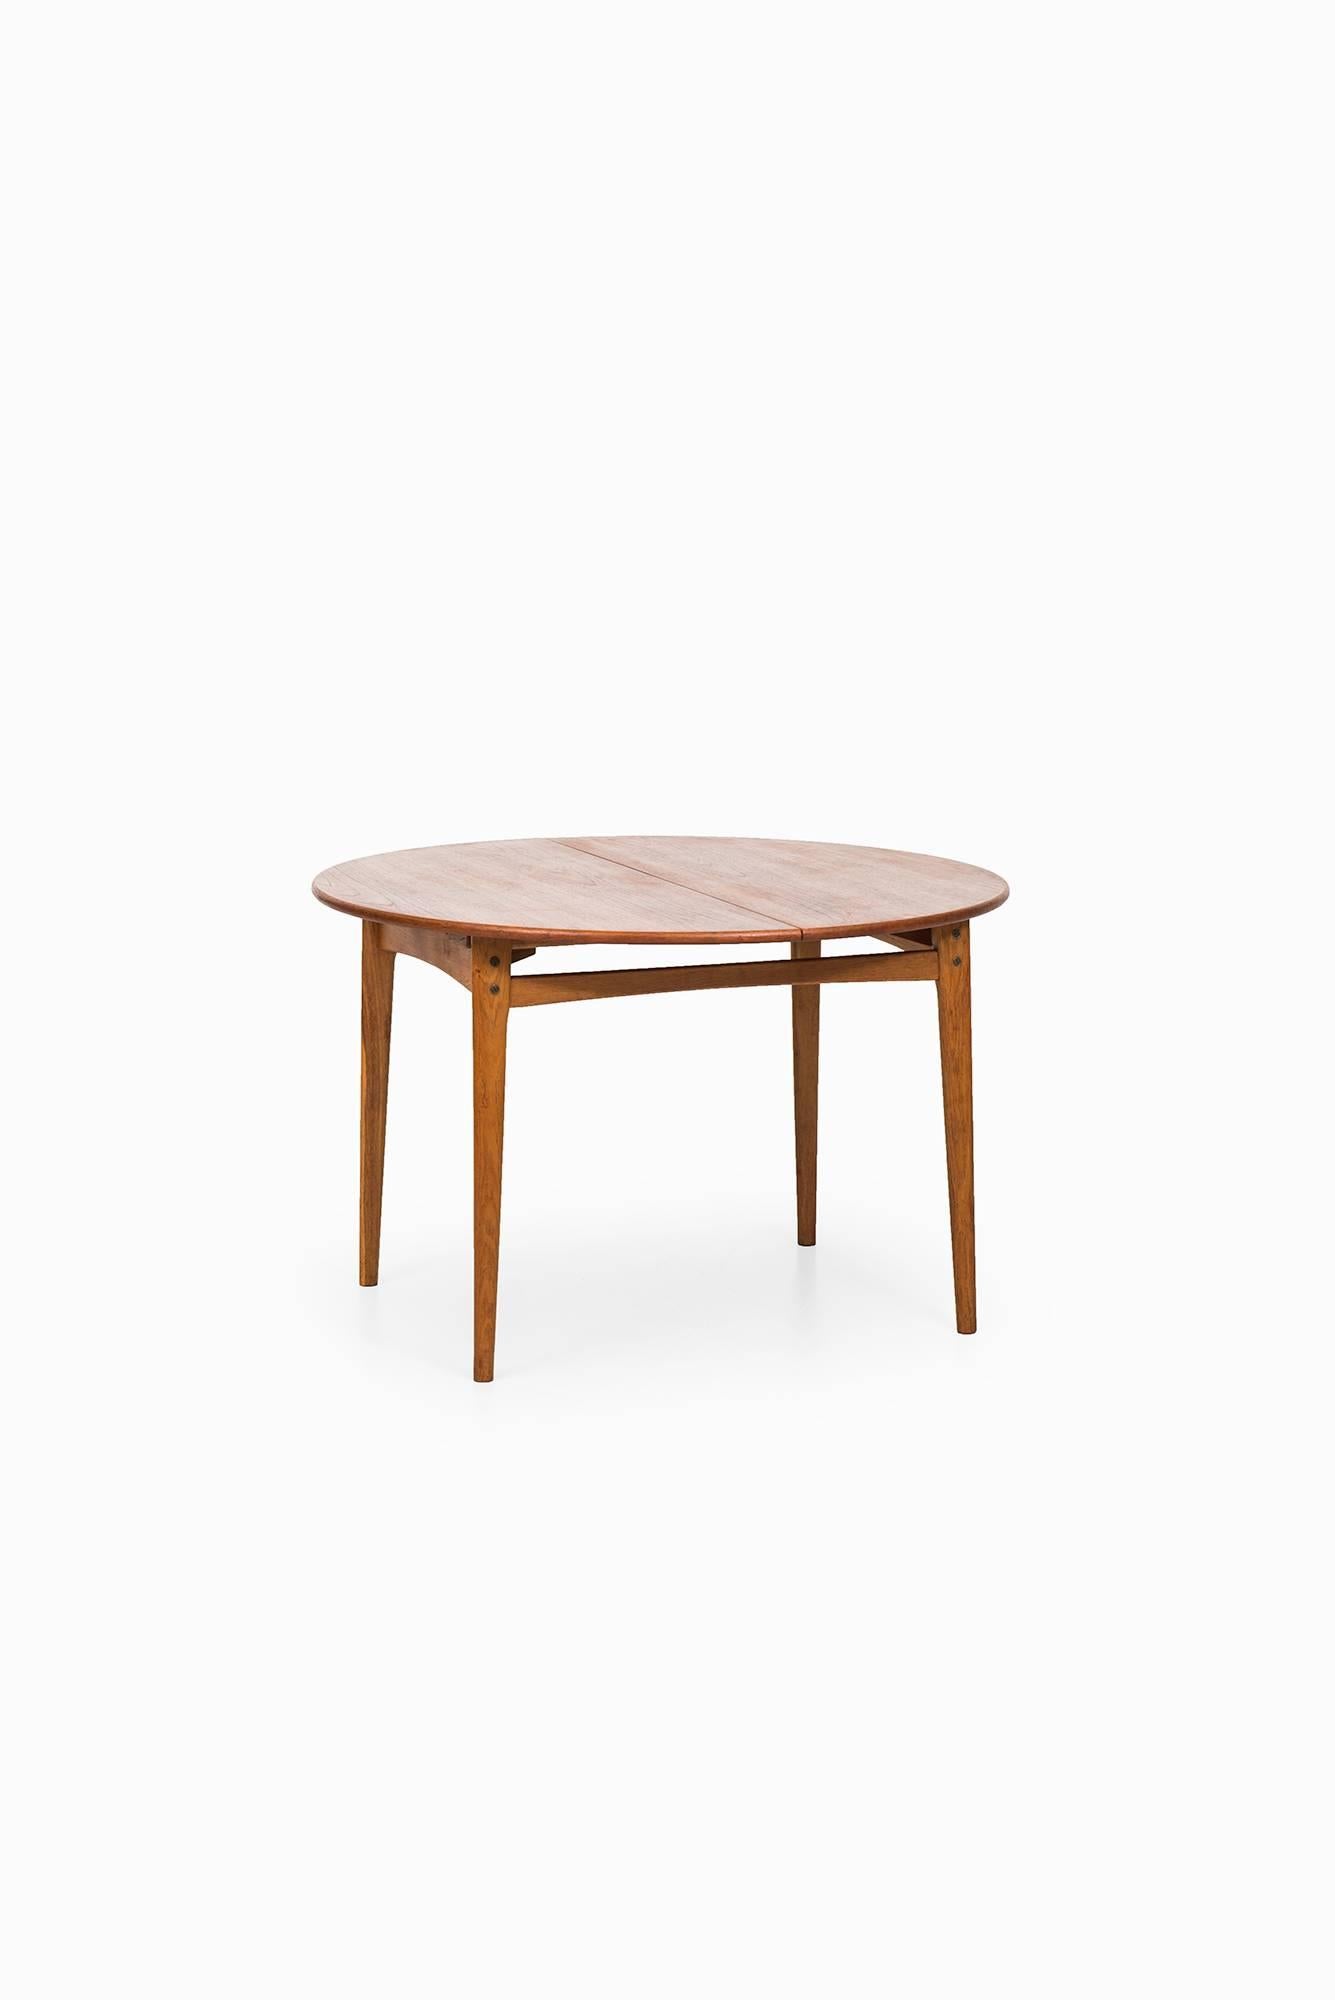 Mid-20th Century Midcentury Dining Table in Oak with Teak Top 